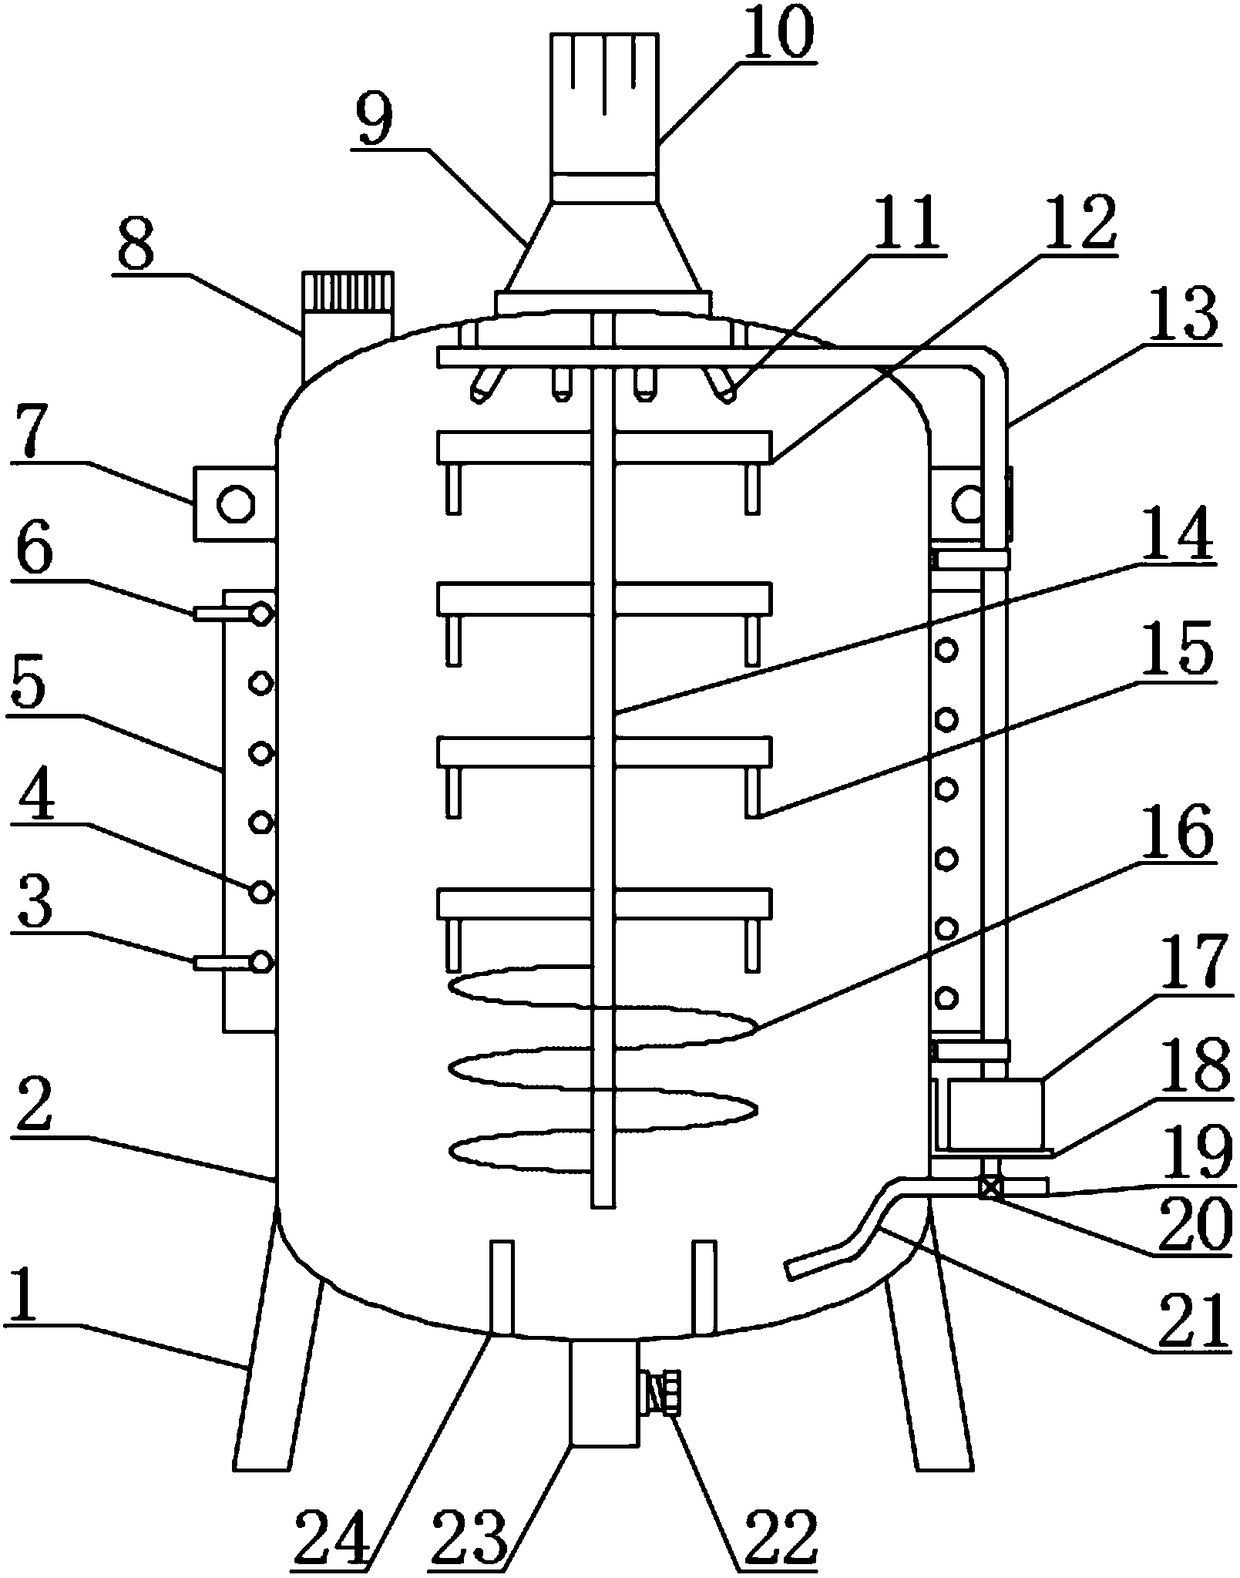 Chemical reaction kettle with temperature regulation function